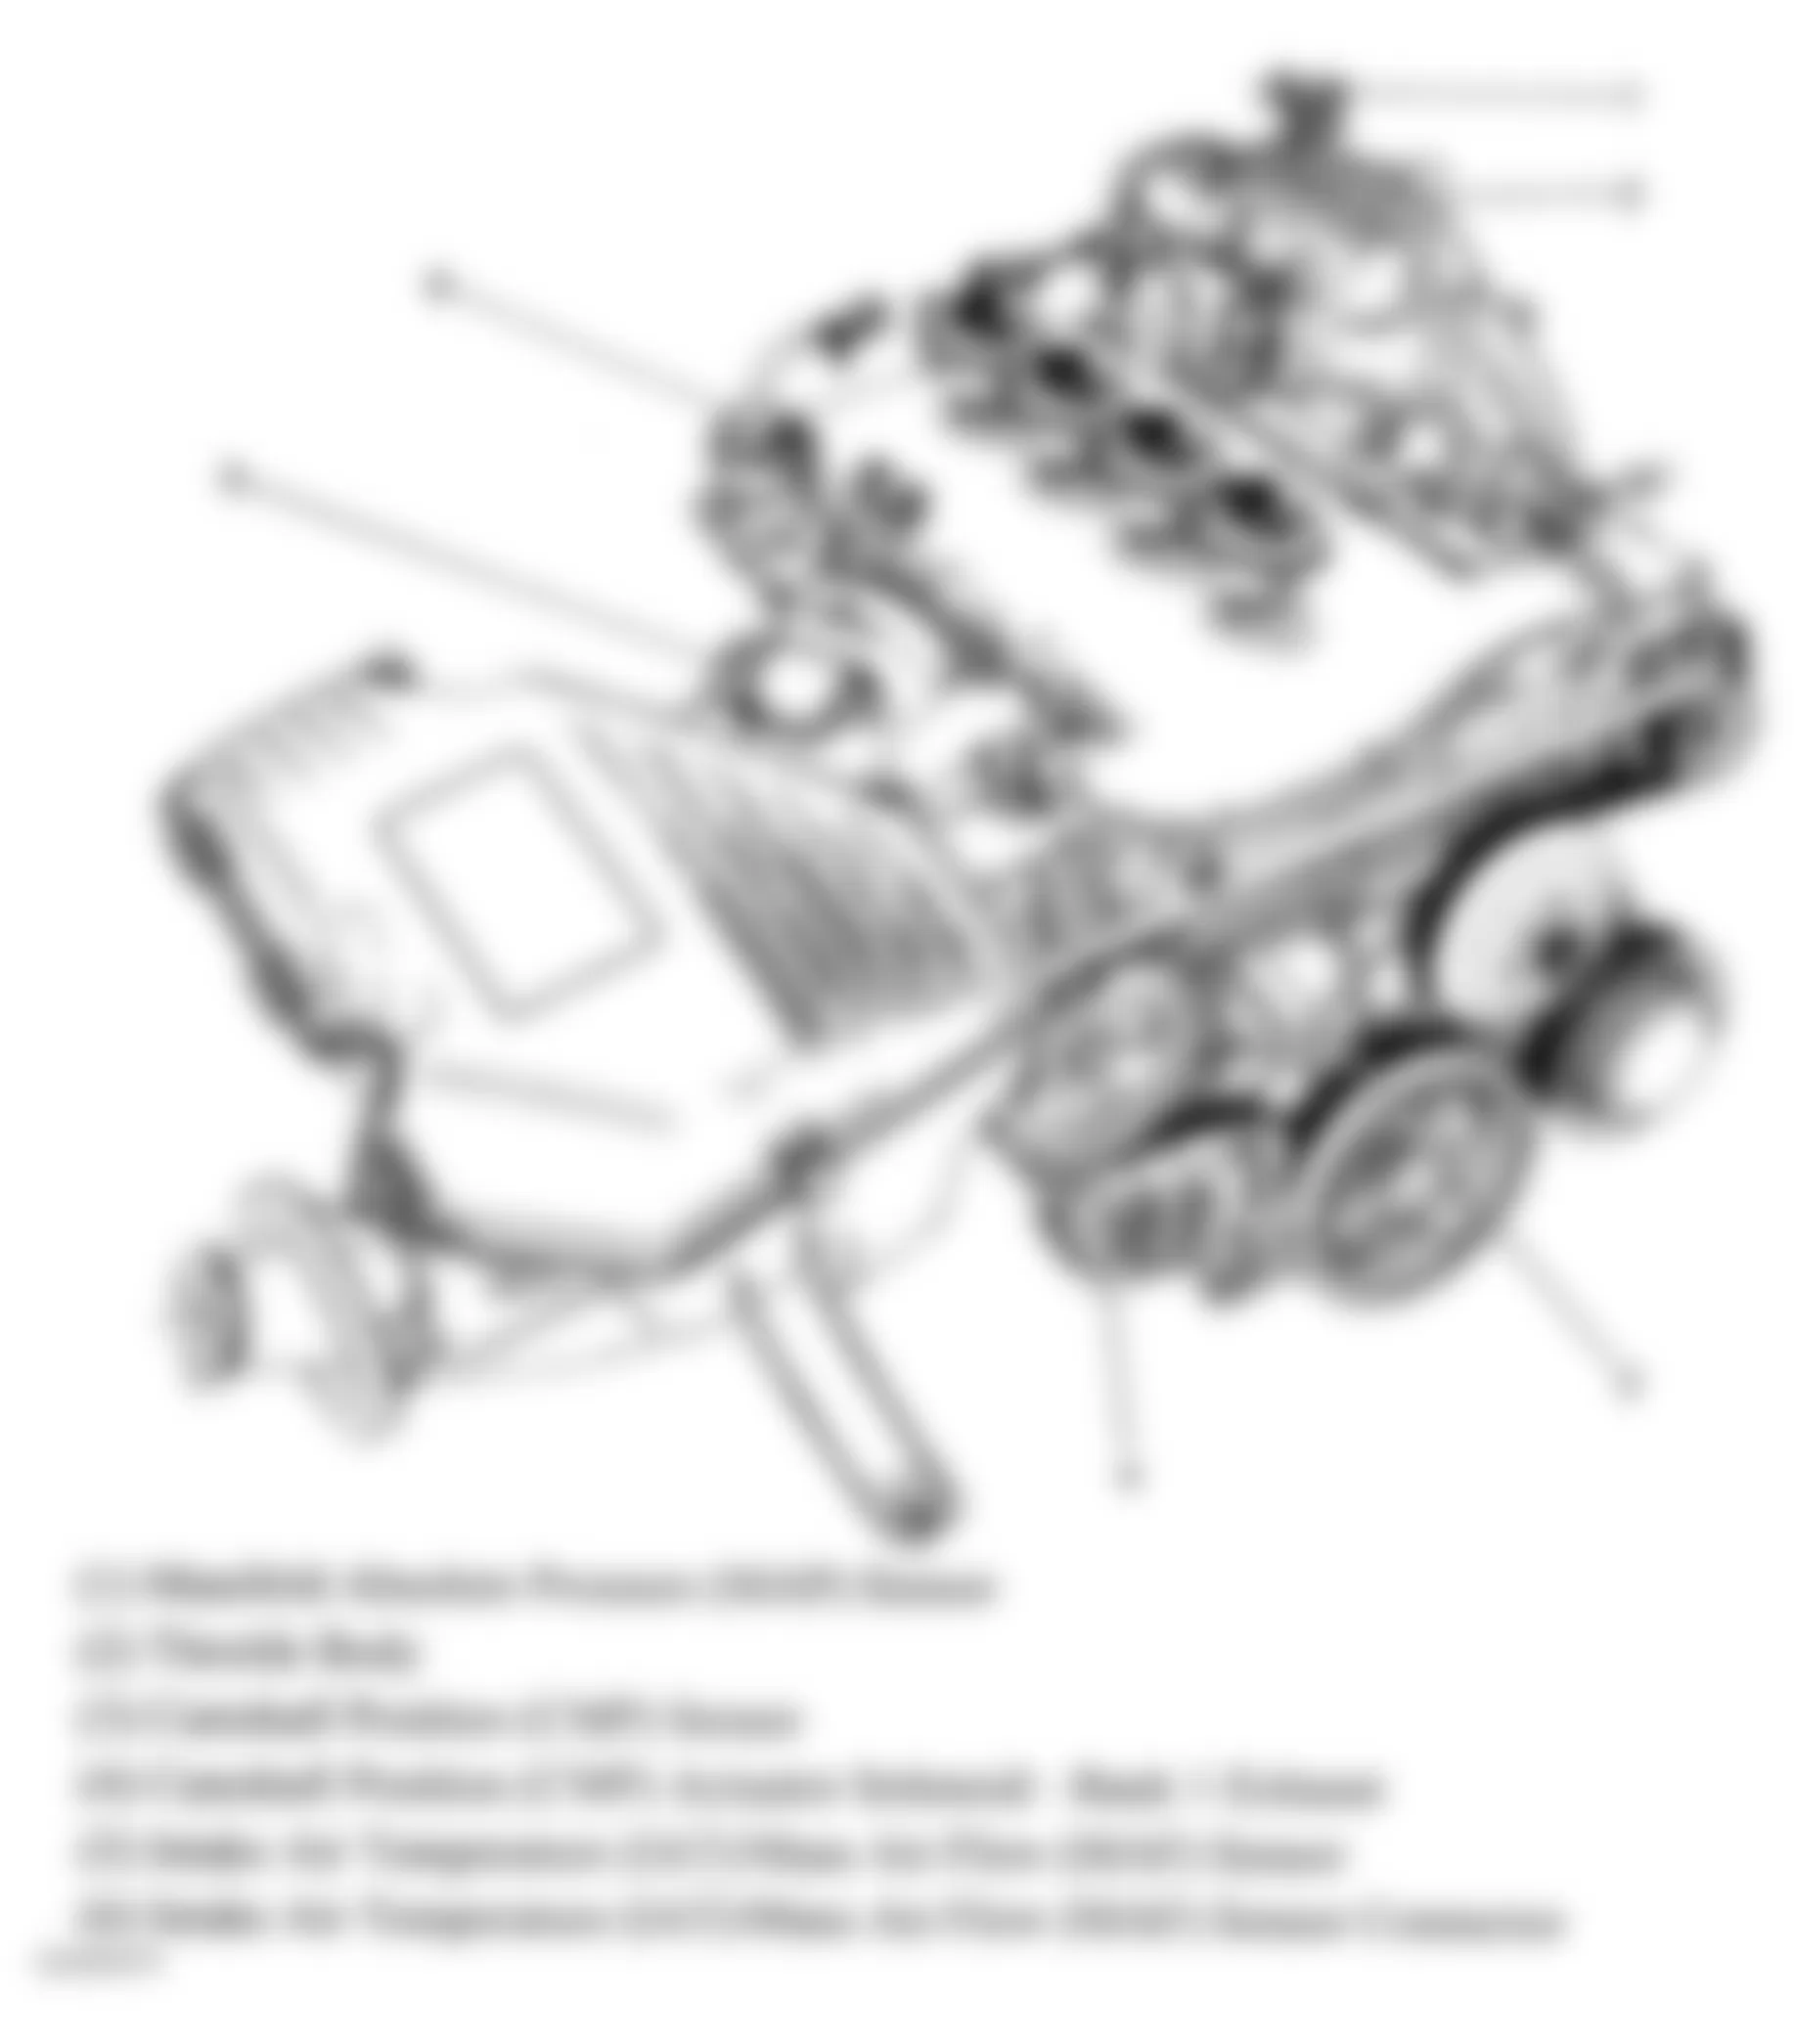 GMC Canyon 2010 - Component Locations -  Top/Front View Of Engine (2.9L)